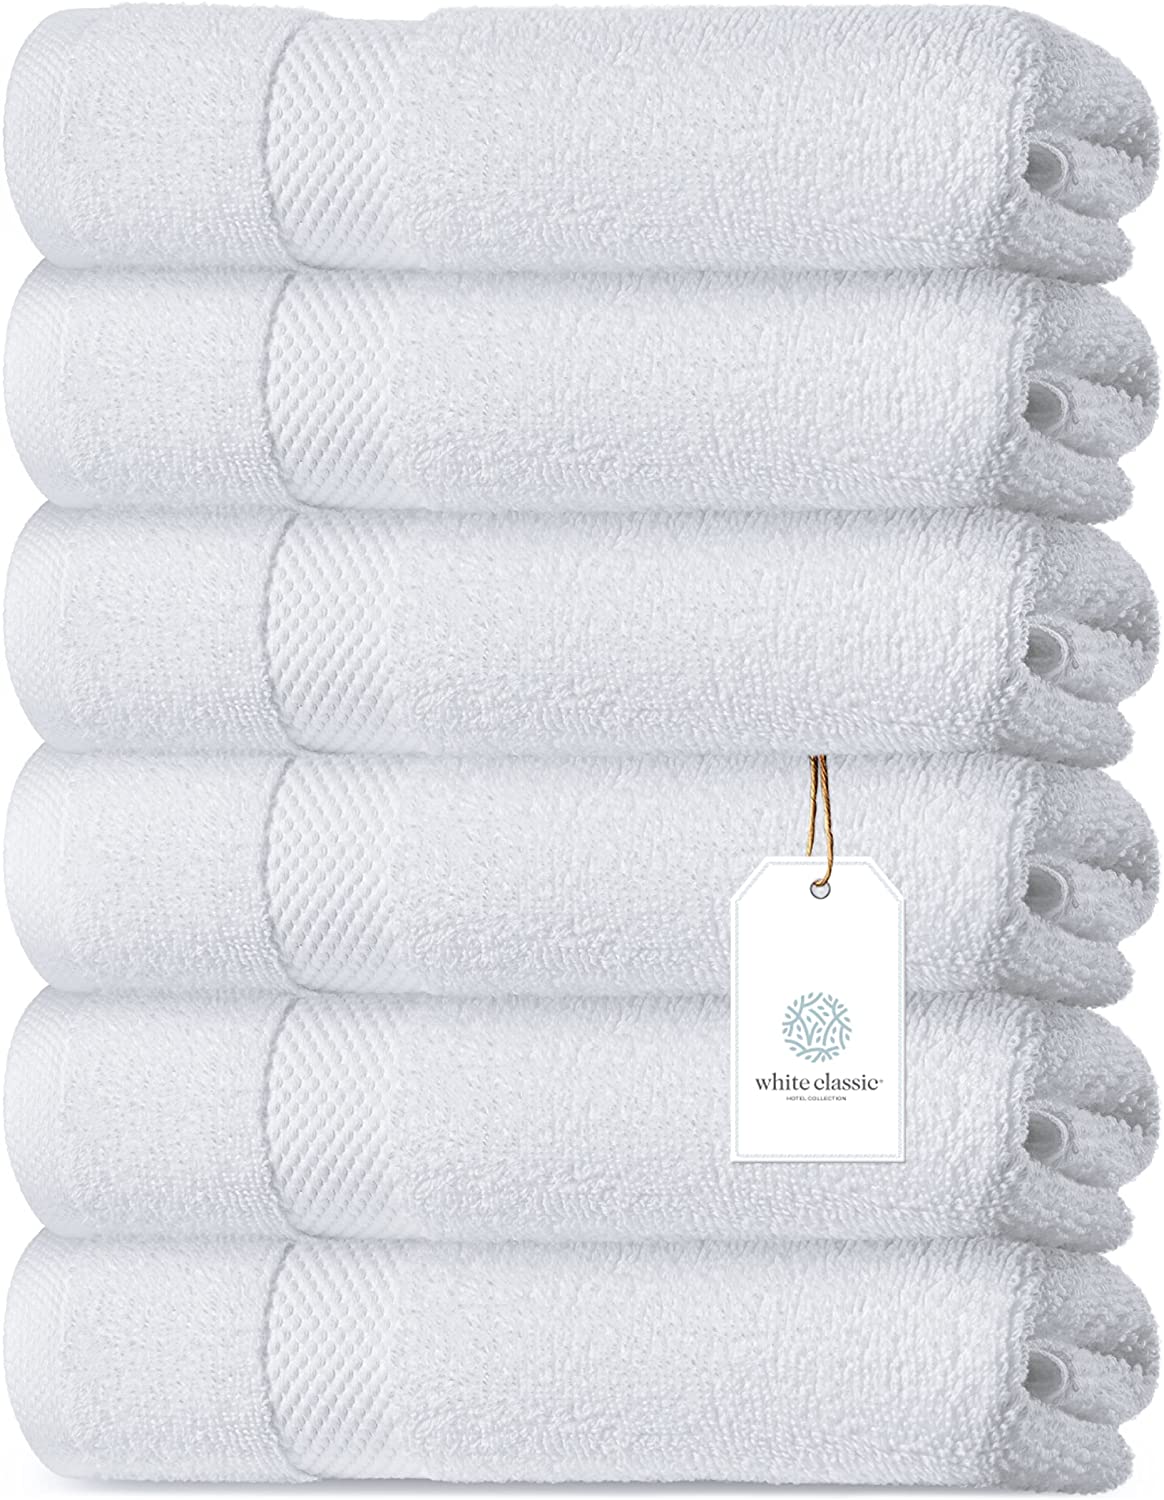 White Classic Quick Dry Long-Lasting Egyptian Cotton Bath Towels, Set Of 6